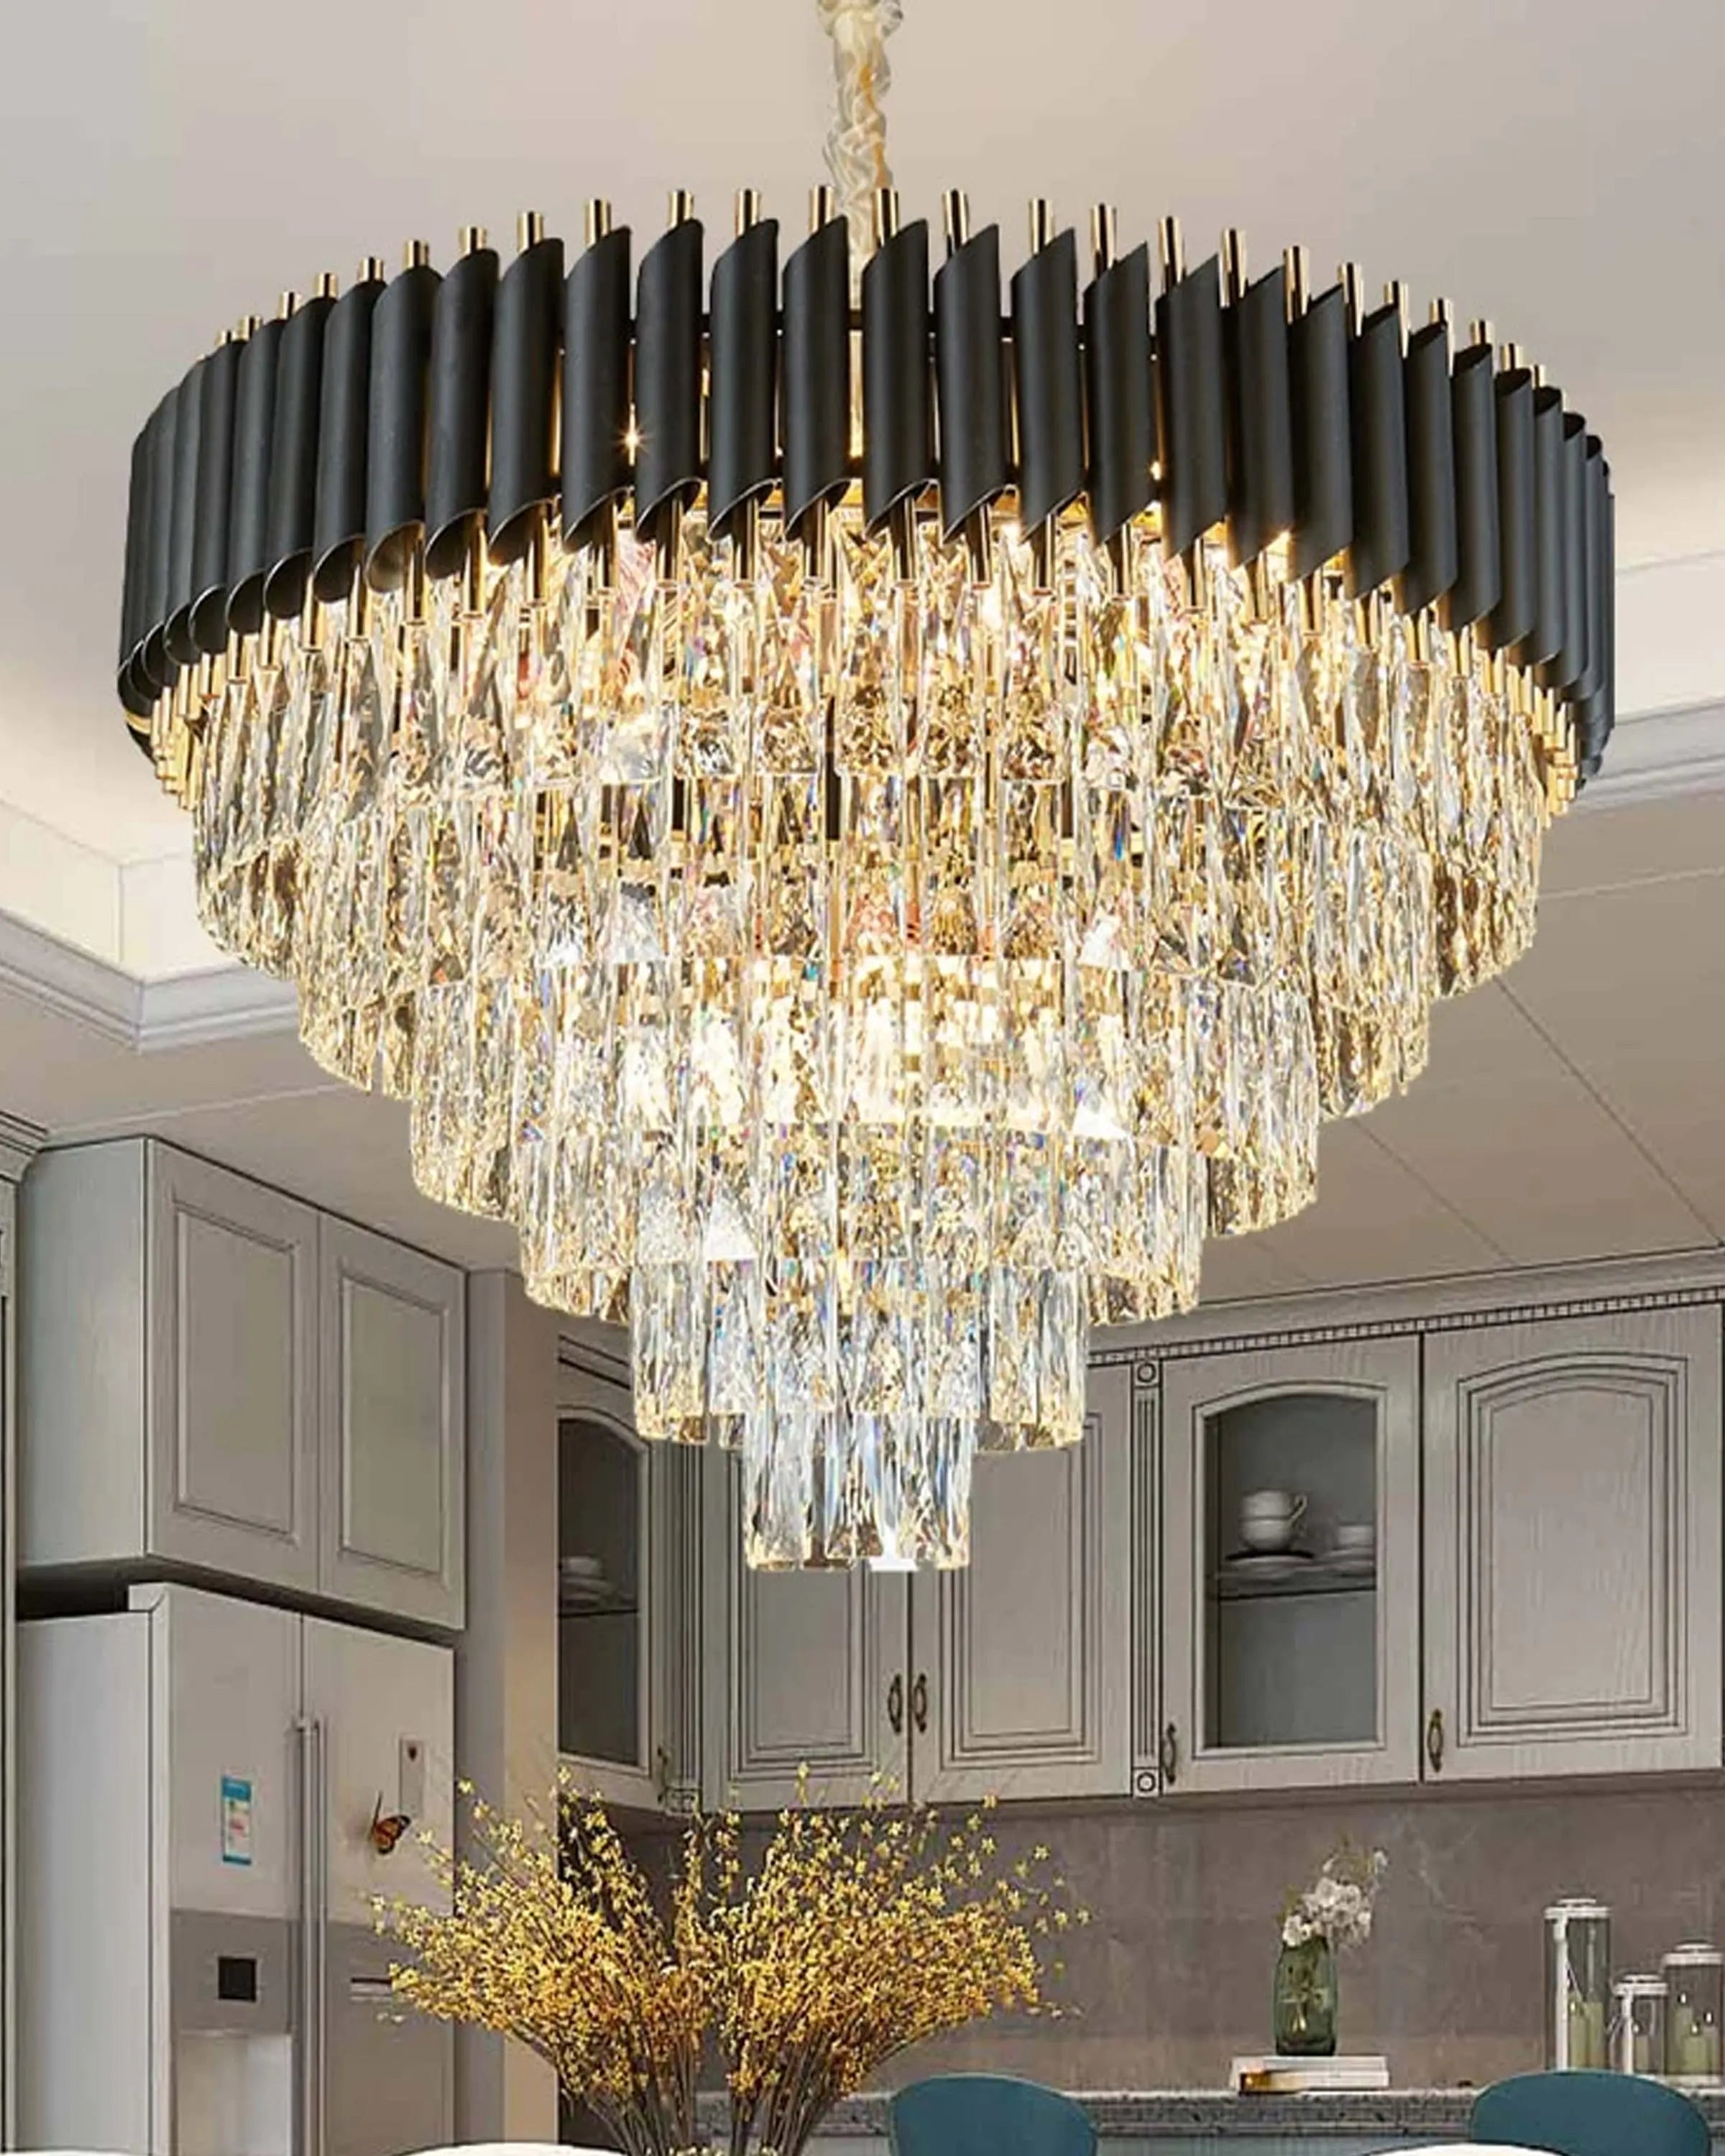 Denali Classic Crystal Chandelier ANGIE HOMES